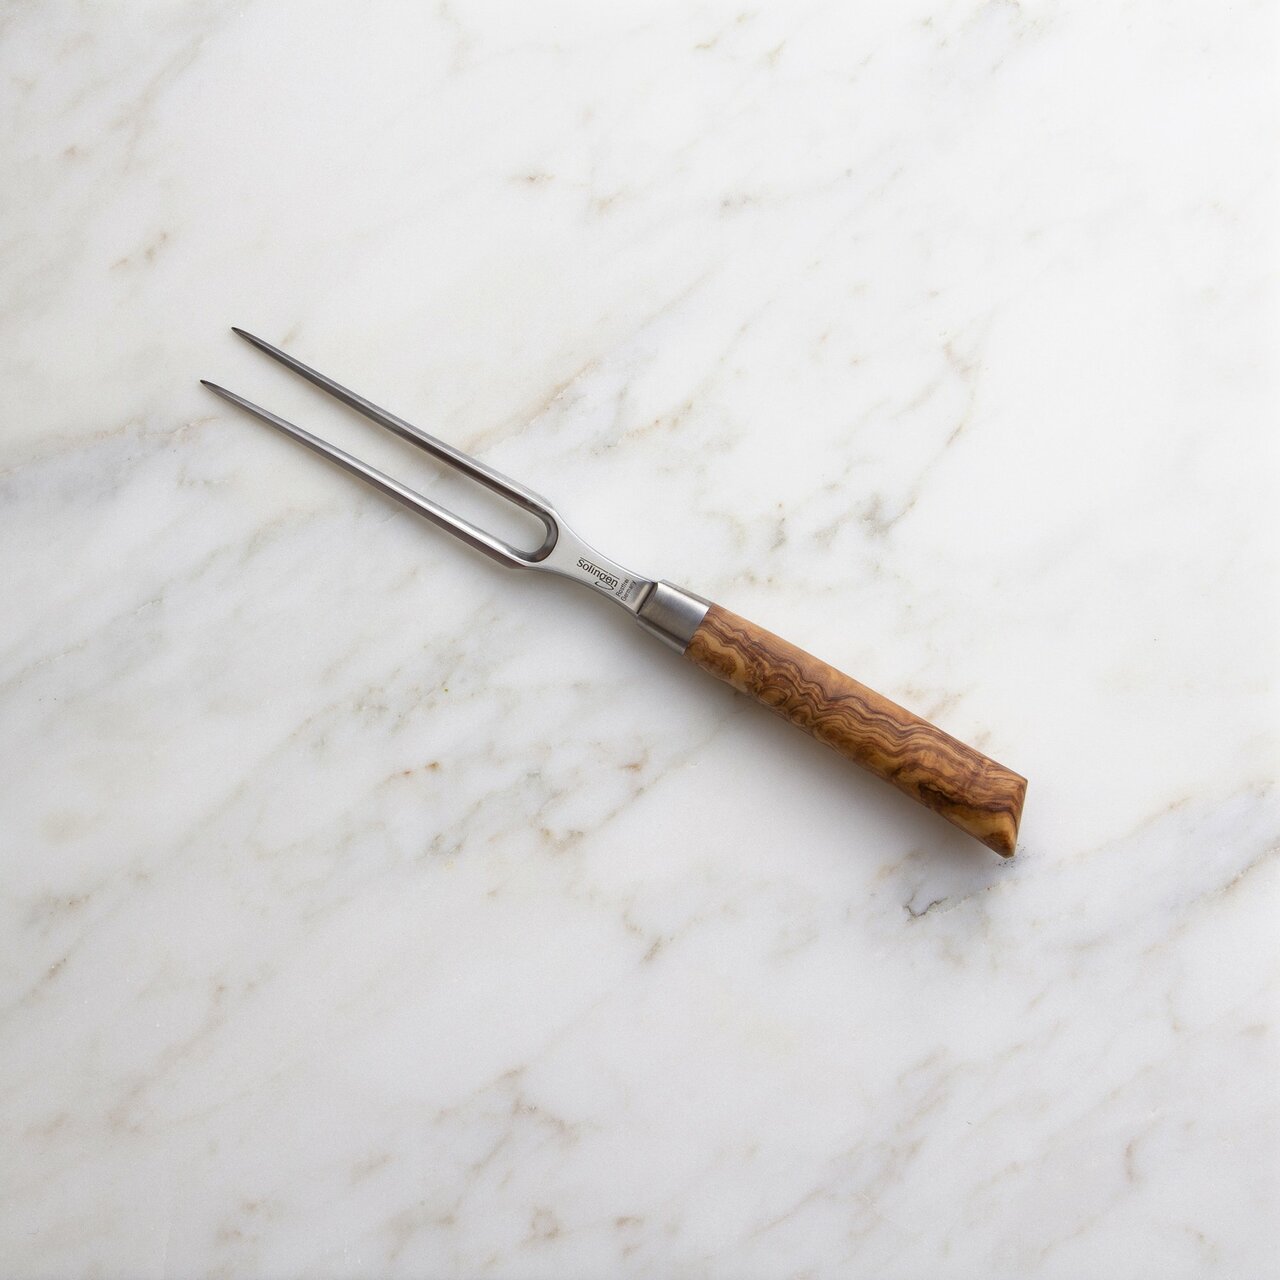 BEON.COM.AU E6805 6         Oliva Elite 6 Inch Straight Carving Fork The Messermeister Oliva Elite 6 Inch Straight Carving Fork has a beautiful Mediterranean olive wood handle and fully forged fork tines. It is the idean accompaniment to any Messermeister carving knife. The straight tines hold meat in place ... Messermeister at BEON.COM.AU